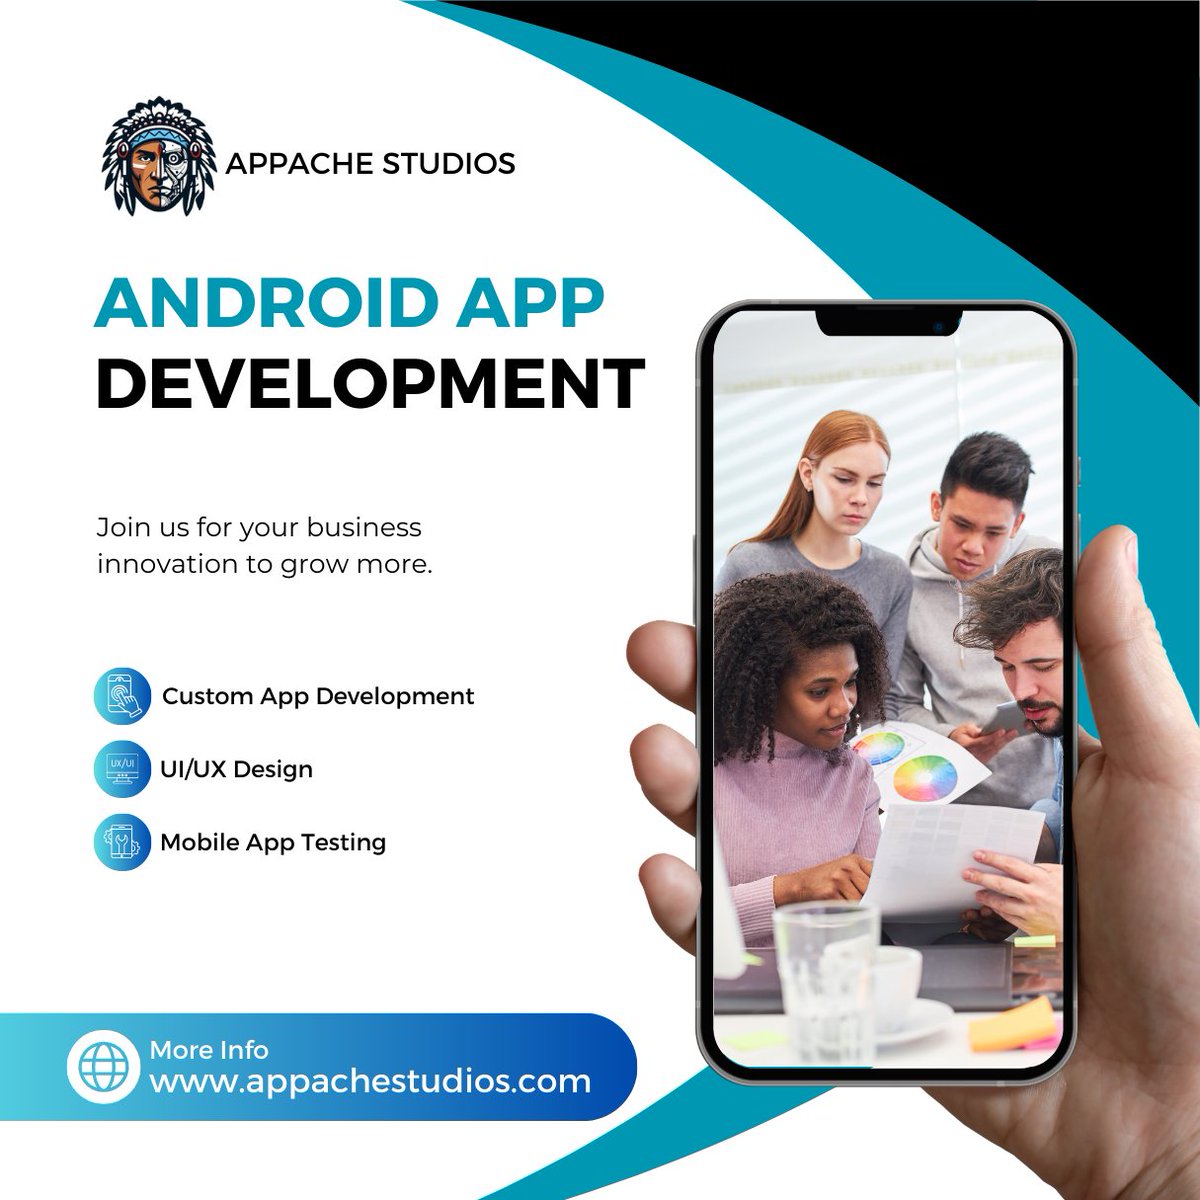 Transform your vision into a seamless digital experience with our expert Android App Development services. Let's bring your ideas to life, one line of code at a time!

Visit Now: appachestudios.com

#appachestudios #appdeveloper #androidapp #techsolutions